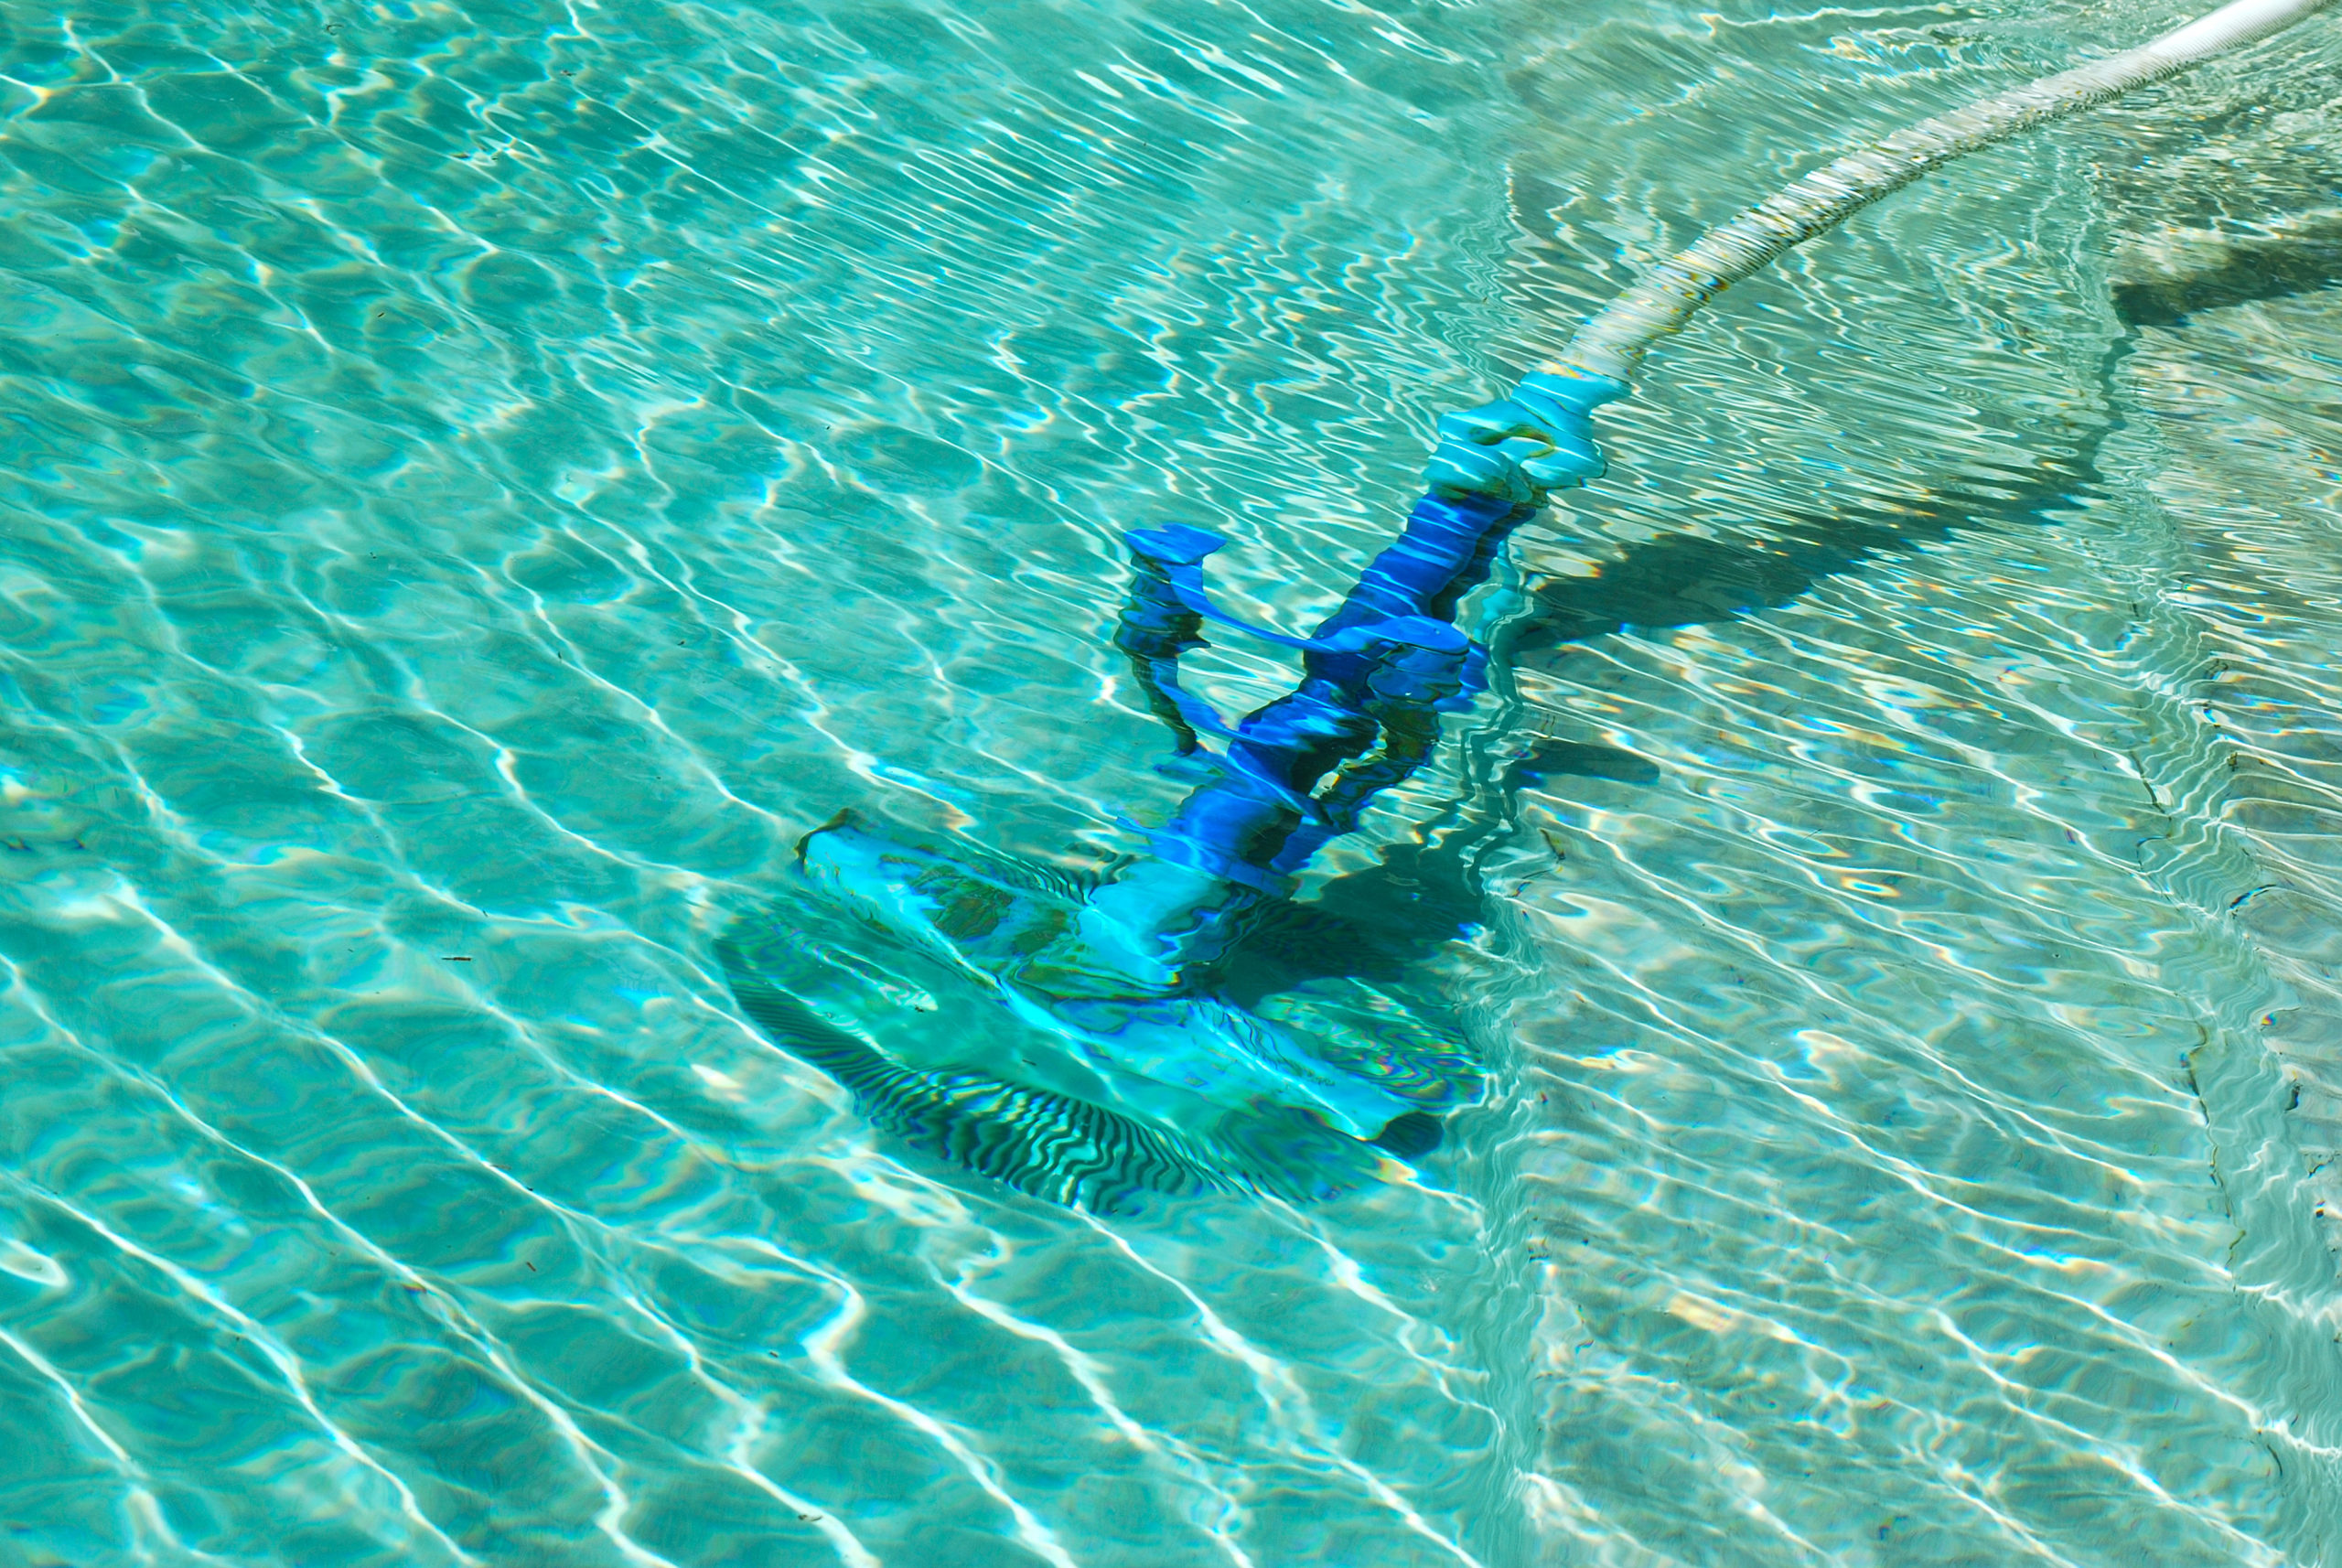 Pool cleaning in progress using an automatic brush, ensuring a thorough and efficient cleaning of the pool's surfaces.